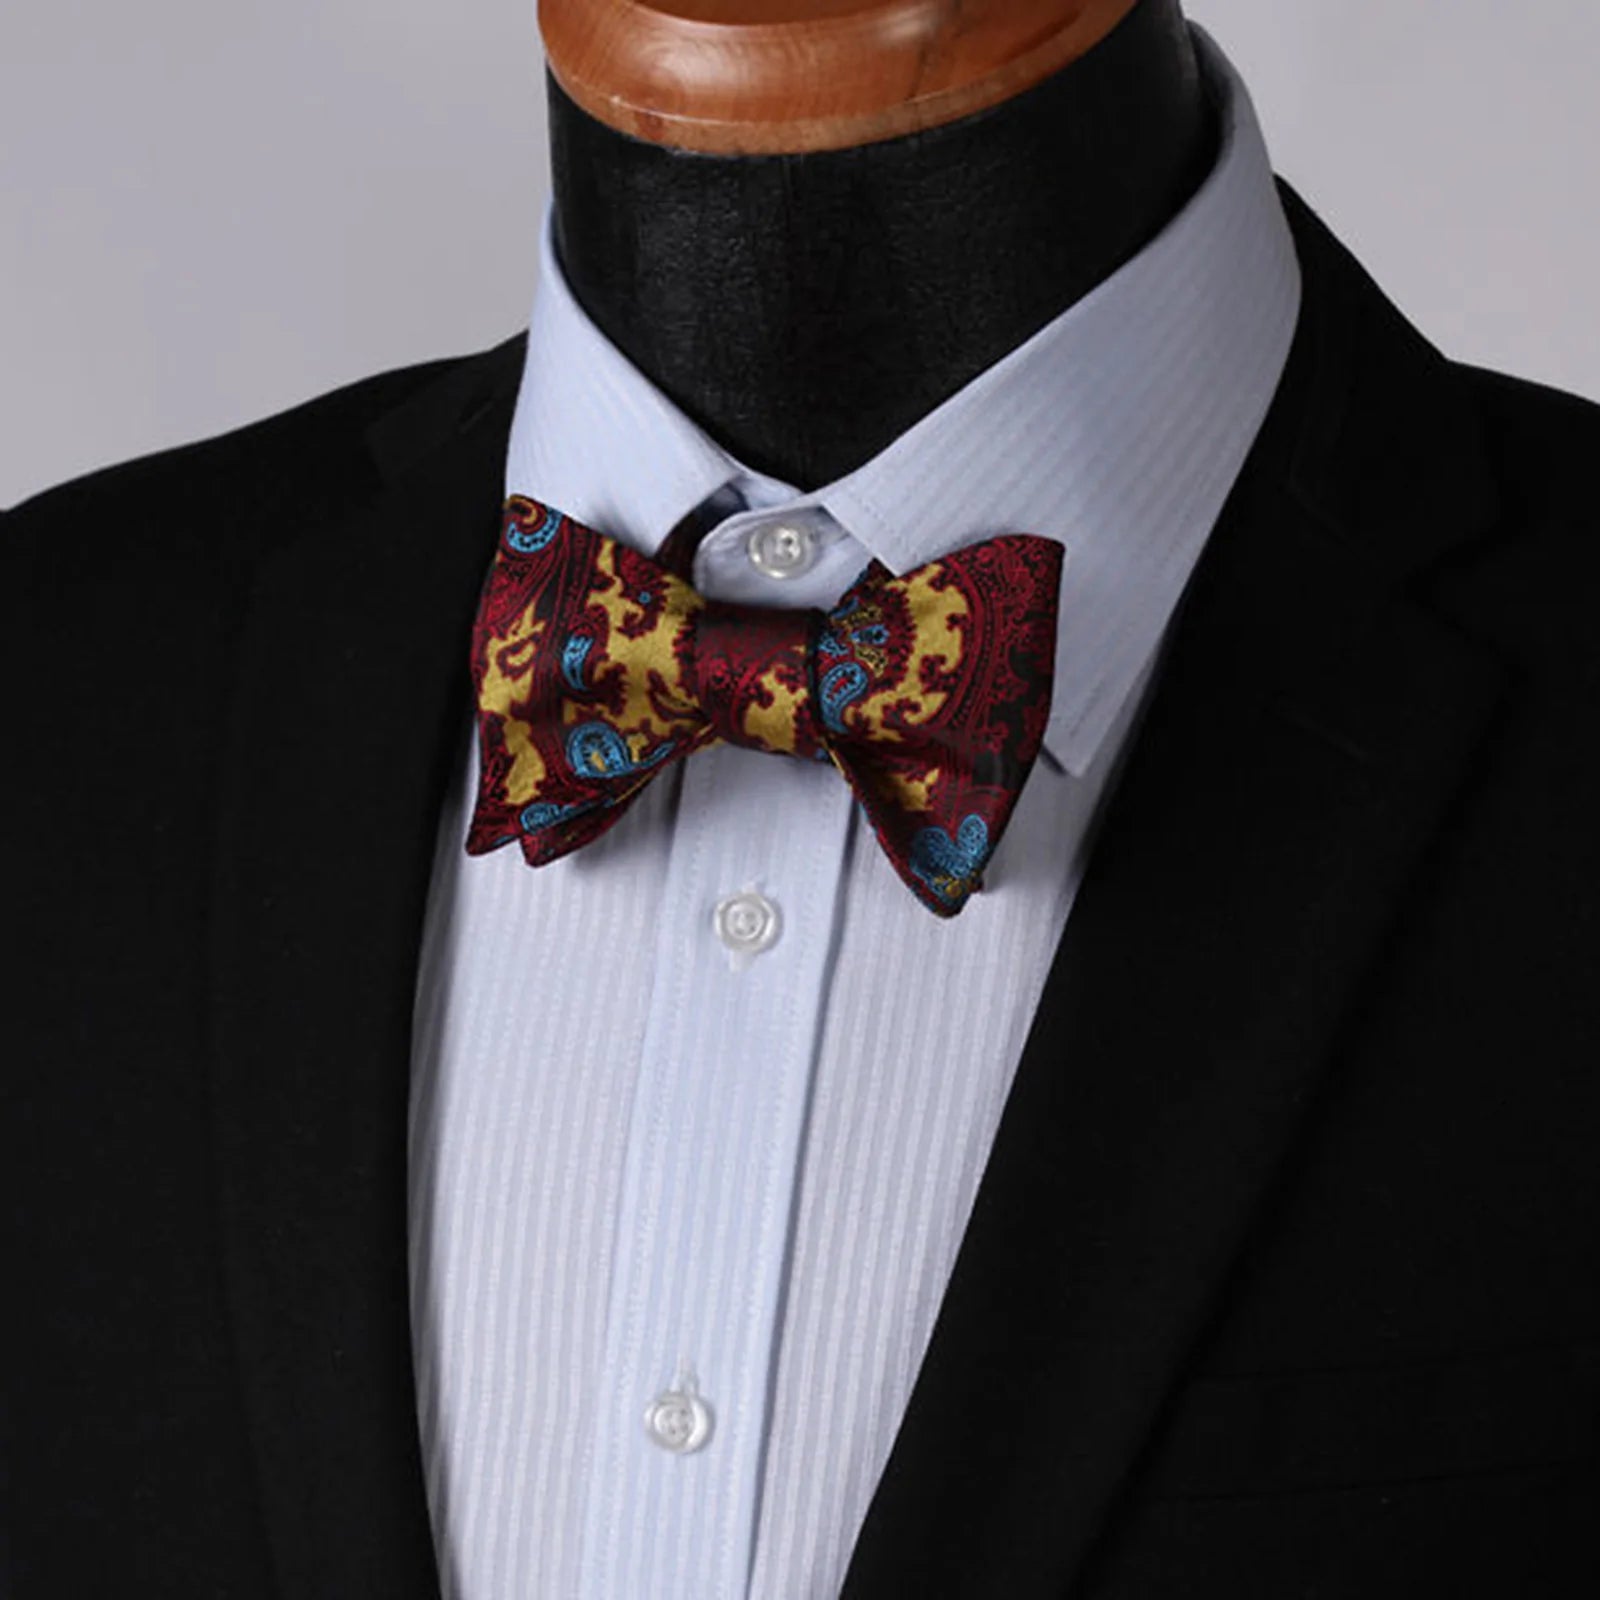 Men’s Bow Ties Guide – Styles and Shapes By Amedeo Exclusive